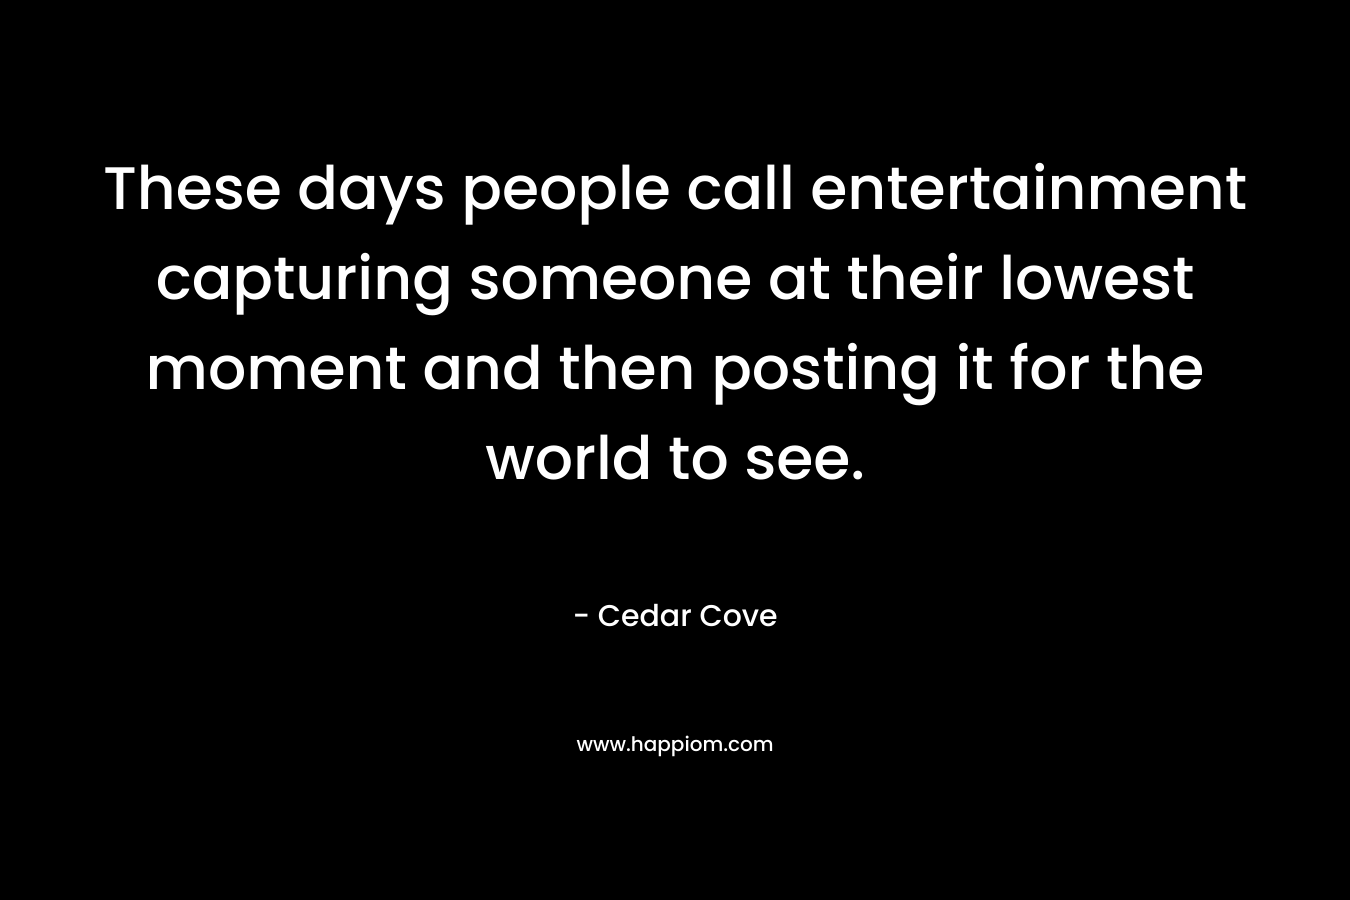 These days people call entertainment capturing someone at their lowest moment and then posting it for the world to see.